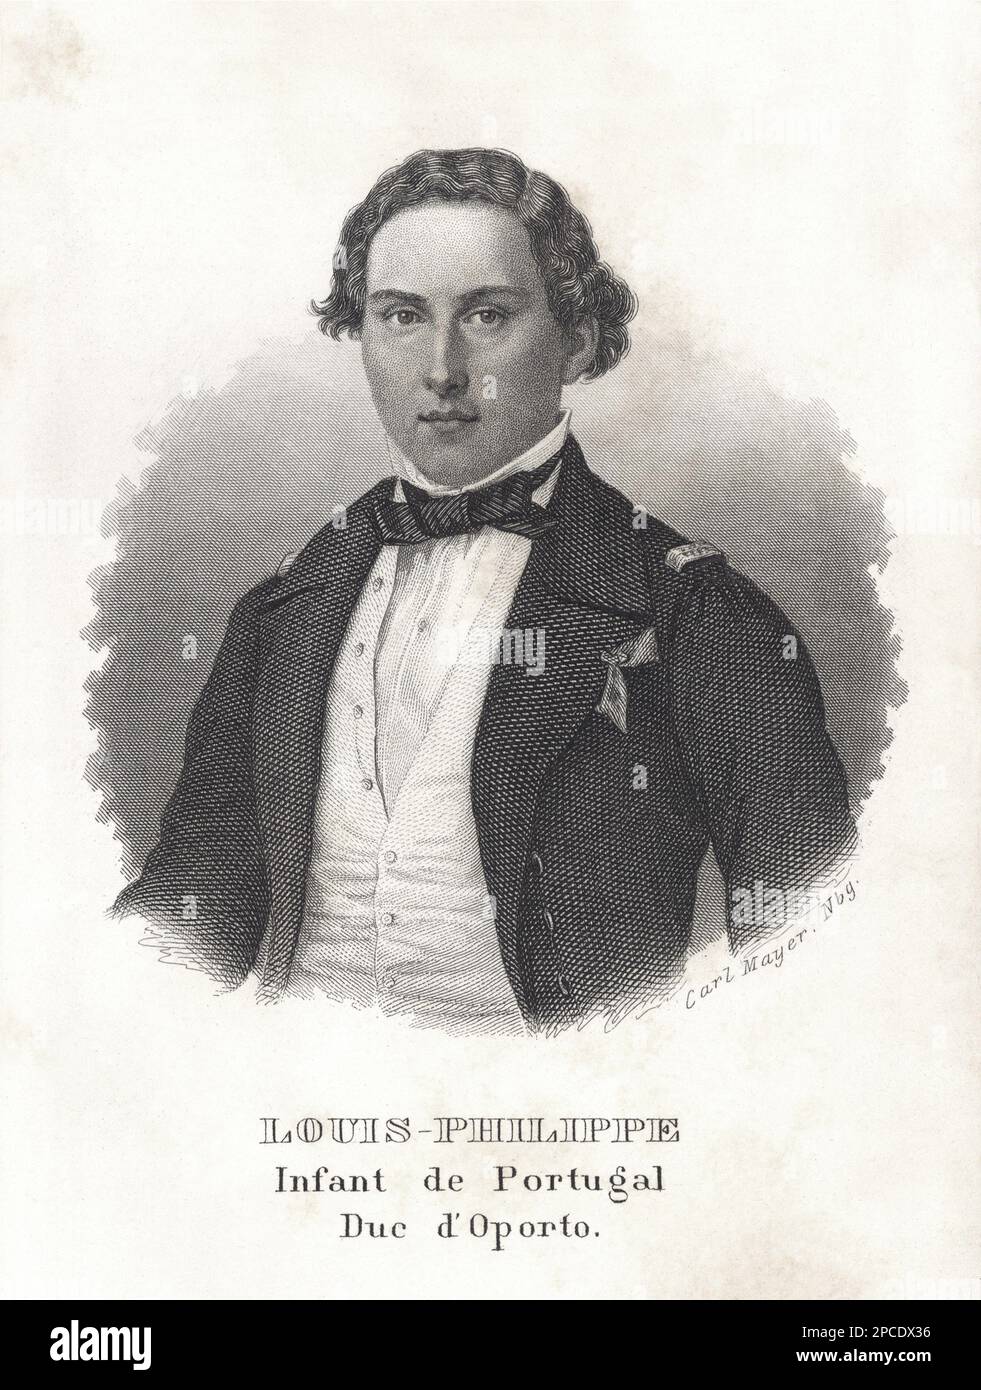 1860 ca : The prince Real of Beira of Portugal  LOUIS PHILIPPE  ( Luis Filipe ) de BRAGANZA ( 1838 - 1889 ), engraved portrait from ALMANACH DE GOTHA 1861. Future King LUIS I of Portugal and the Algarves from 1861 to 1889. He was the second son of Maria II and Ferdinand of Saxe-Coburg and Gotha and was created Duke of Porto and Viseu . Louis married Maria Pia of Savoy , daughter of Victor Emmanuel II of Italy and Maria Adelaide of Austria. Together they had two sons . - SAVOIA  - CASA de BRAGANCA  - PORTOGALLO  - REALI - Nobiltà  - Amelia   - NOBILITY - ROYALTY - HISTORY - FOTO STORICHE  - Lis Stock Photo